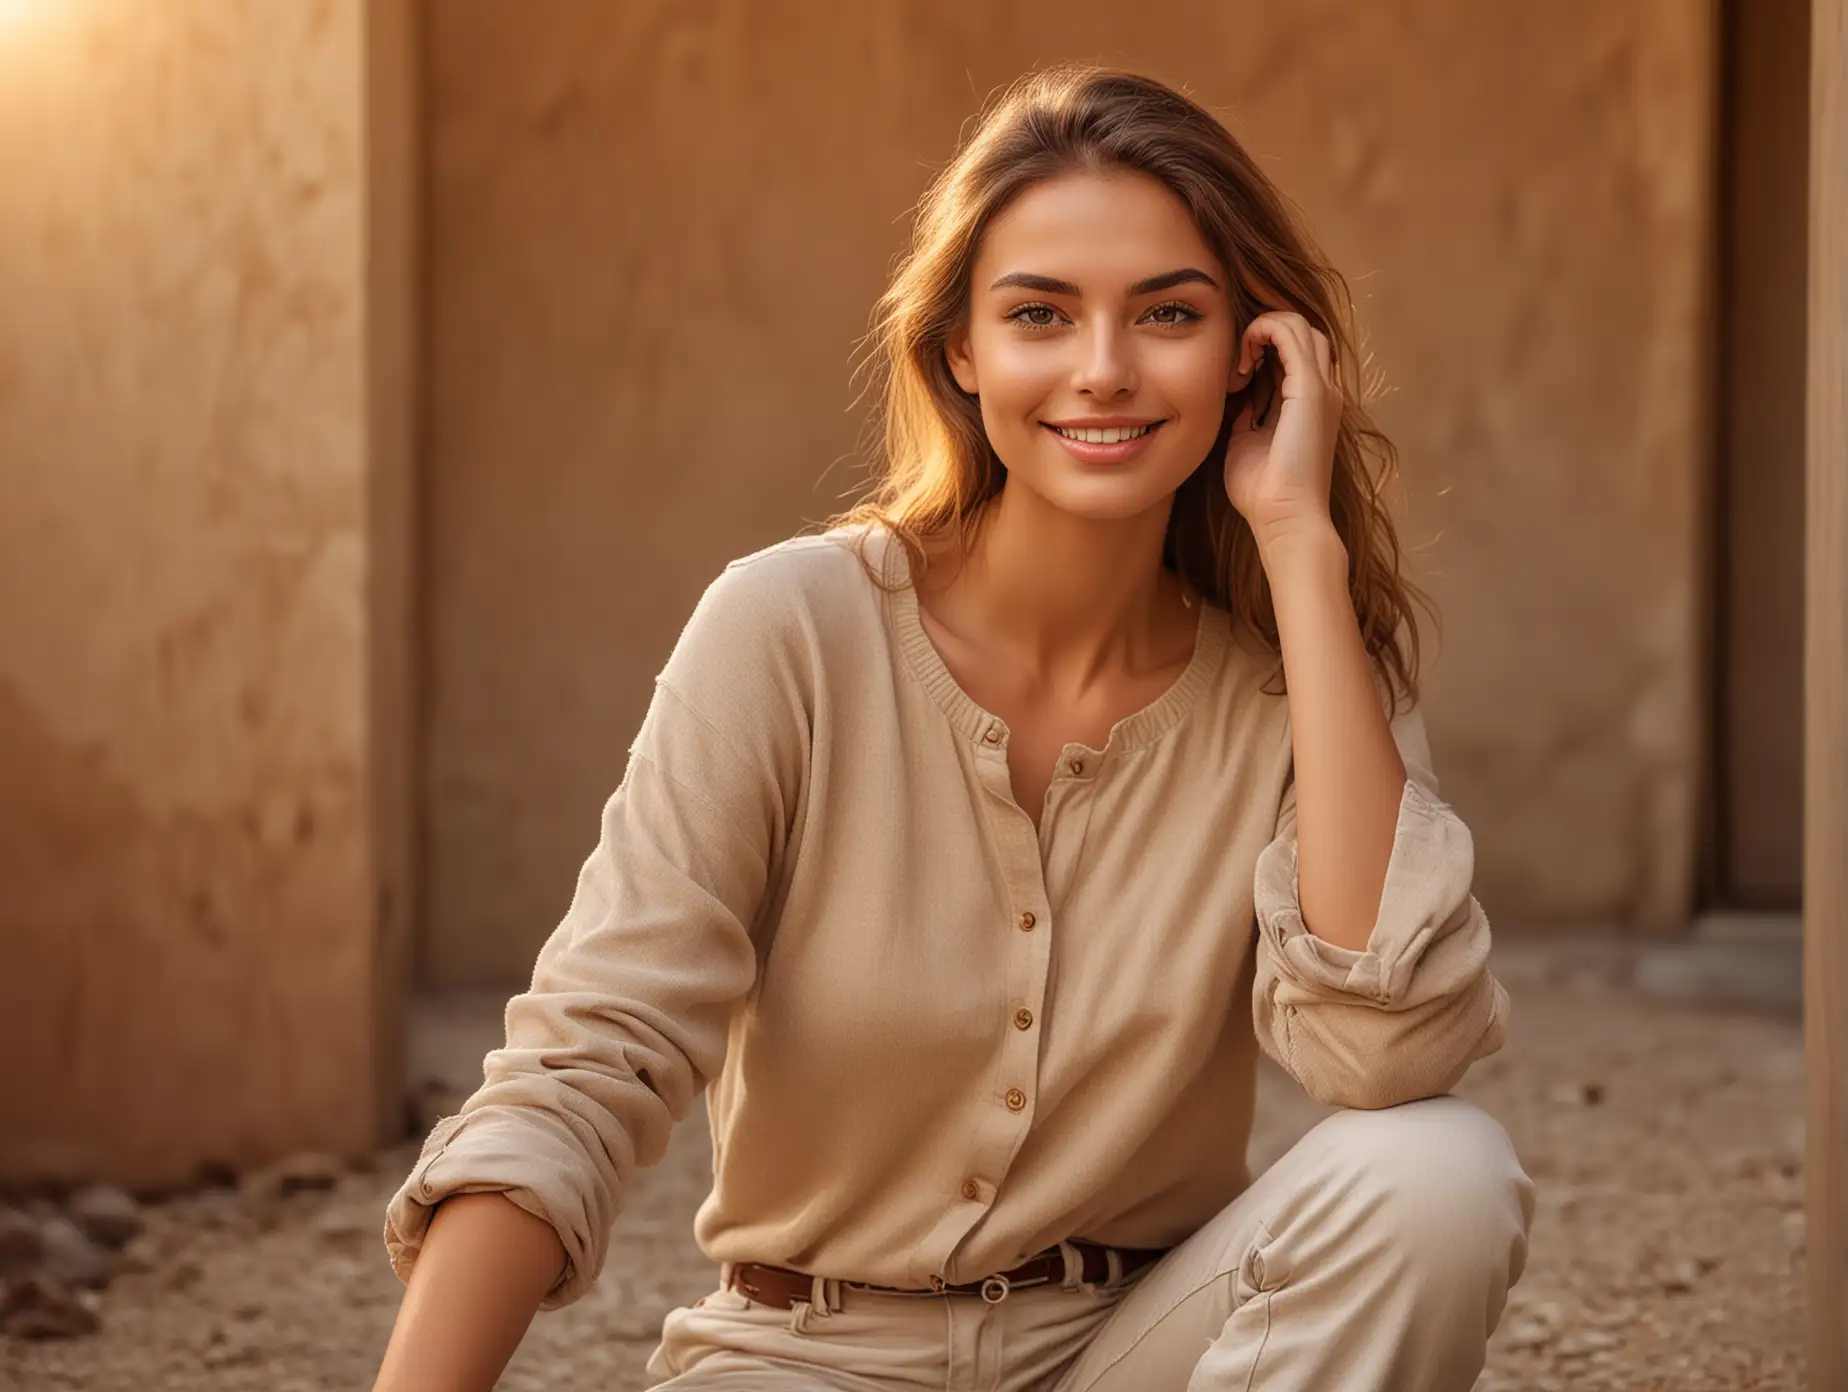 beautiful portrait of an attractive female model, full body,fashion photography, high resolution image, with a natural makeup look, female model with a casual outfit, female model with a relaxed pose, female model with a warm smile, female model in a natural setting, female model surrounded by warm lighting